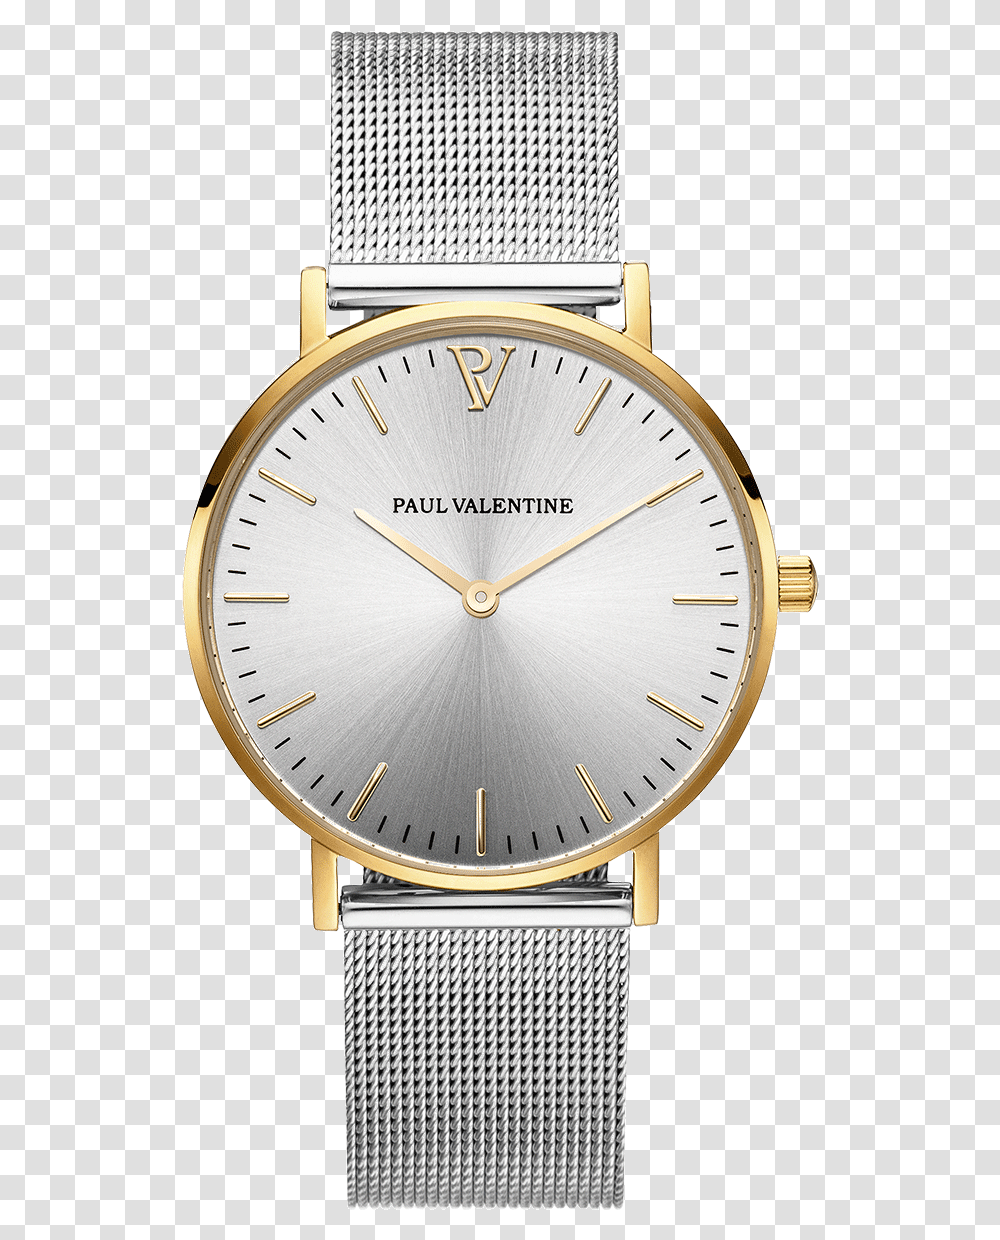 Paul Valentine Gold Silver Watches, Wristwatch, Clock Tower, Architecture, Building Transparent Png